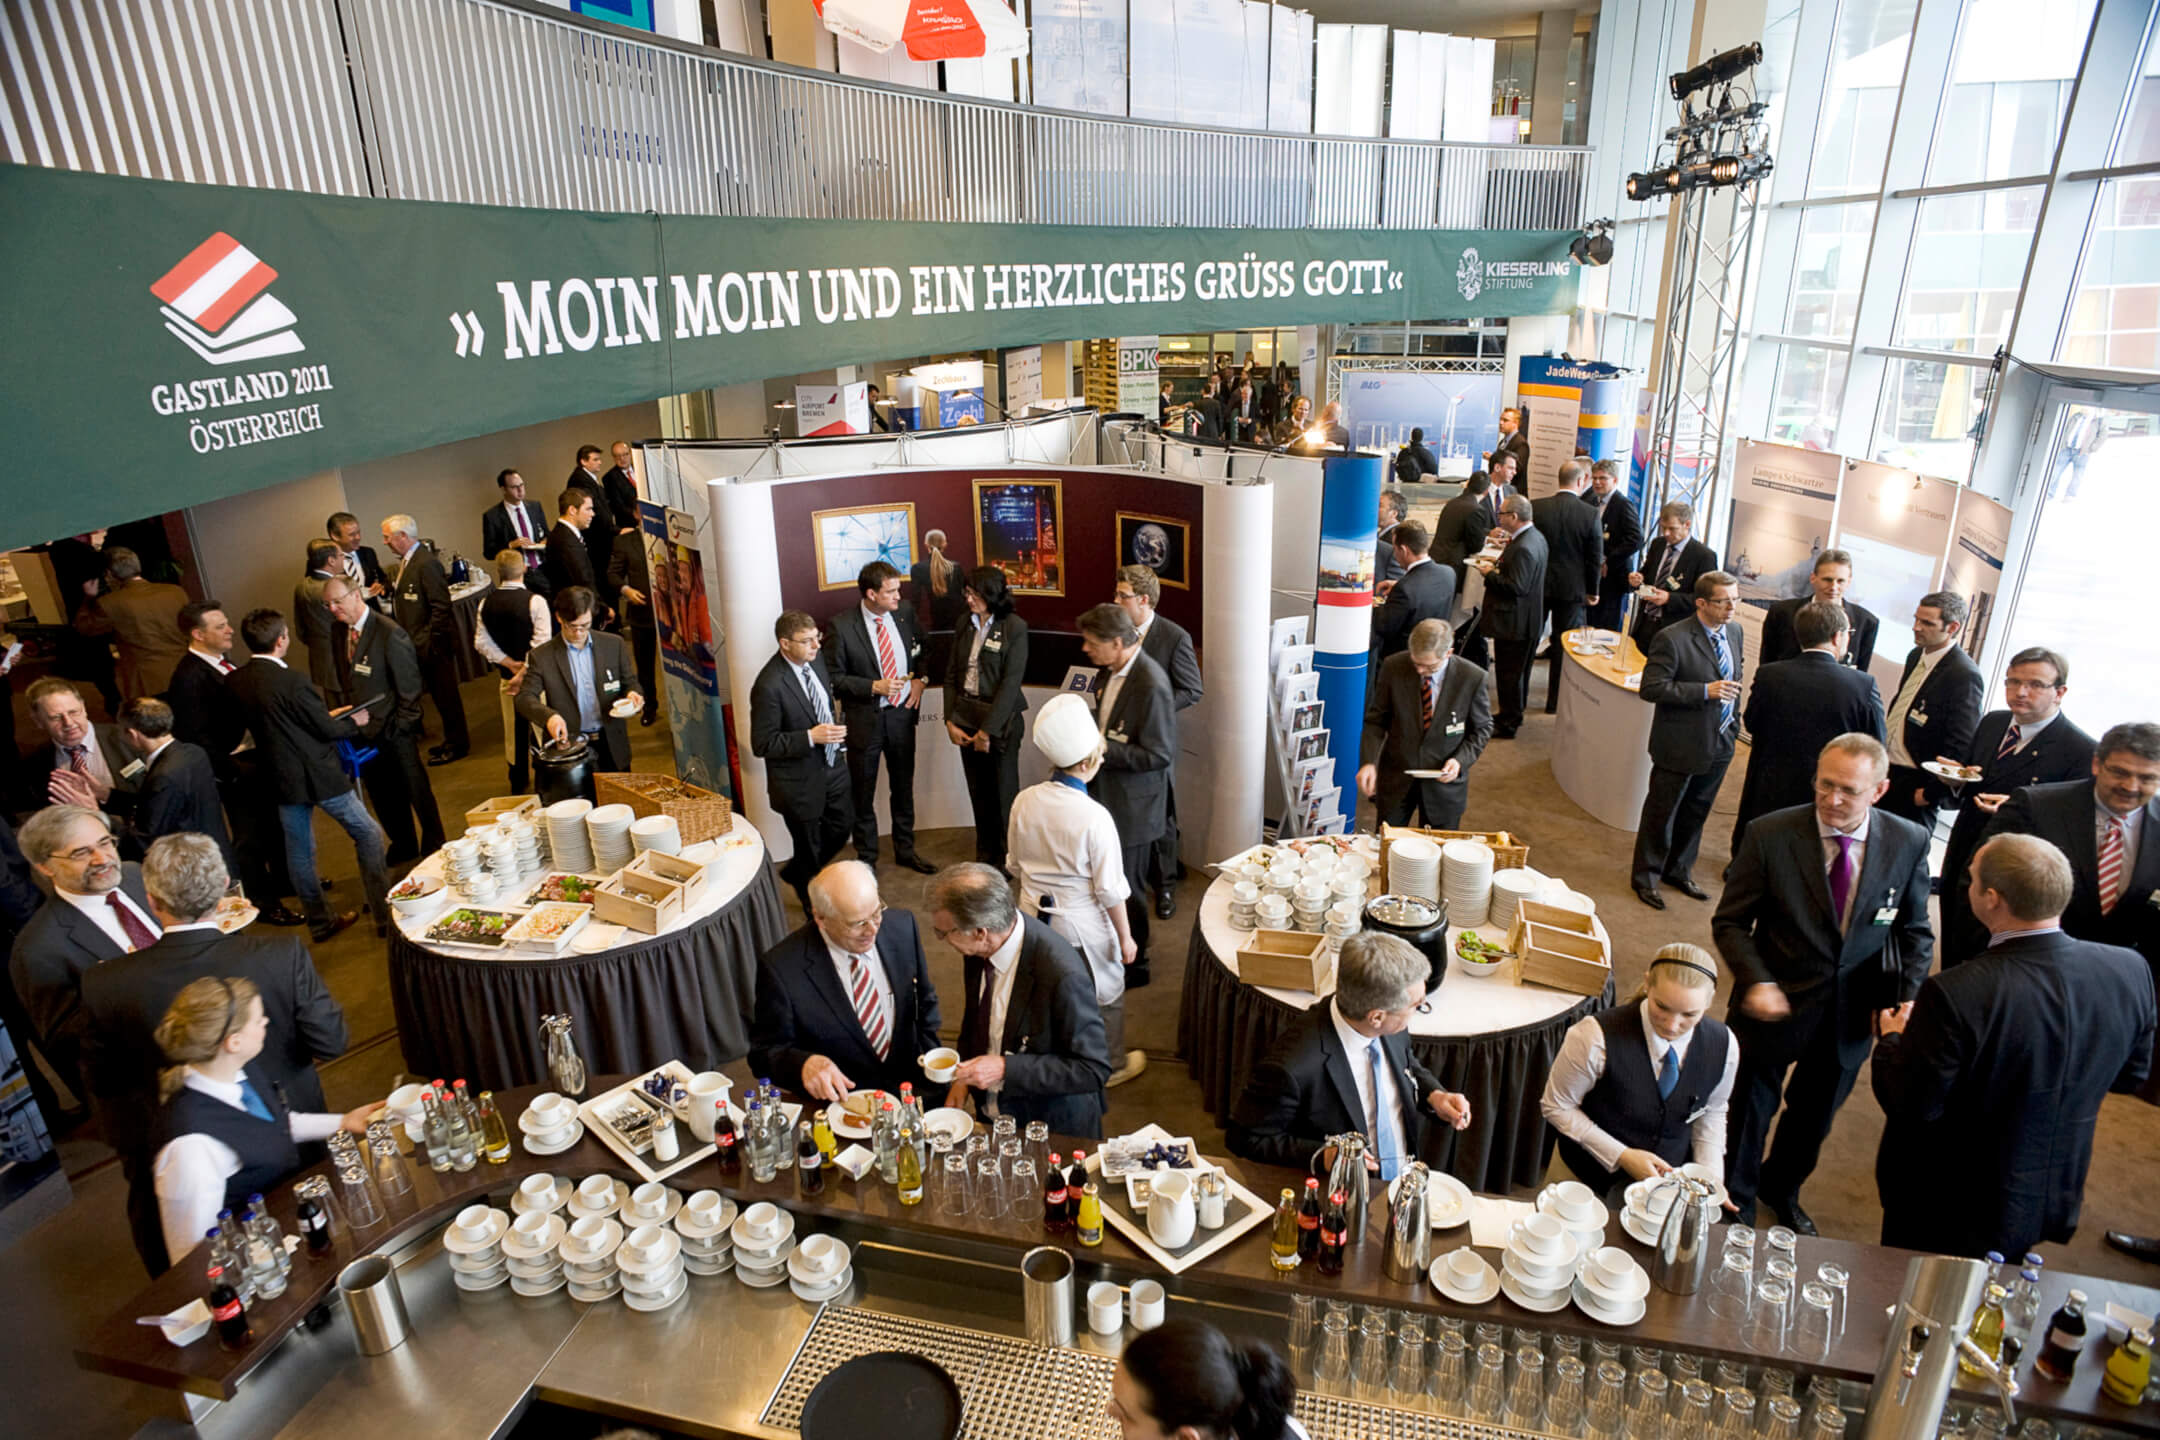 Greeting and buffet in the conference foyer